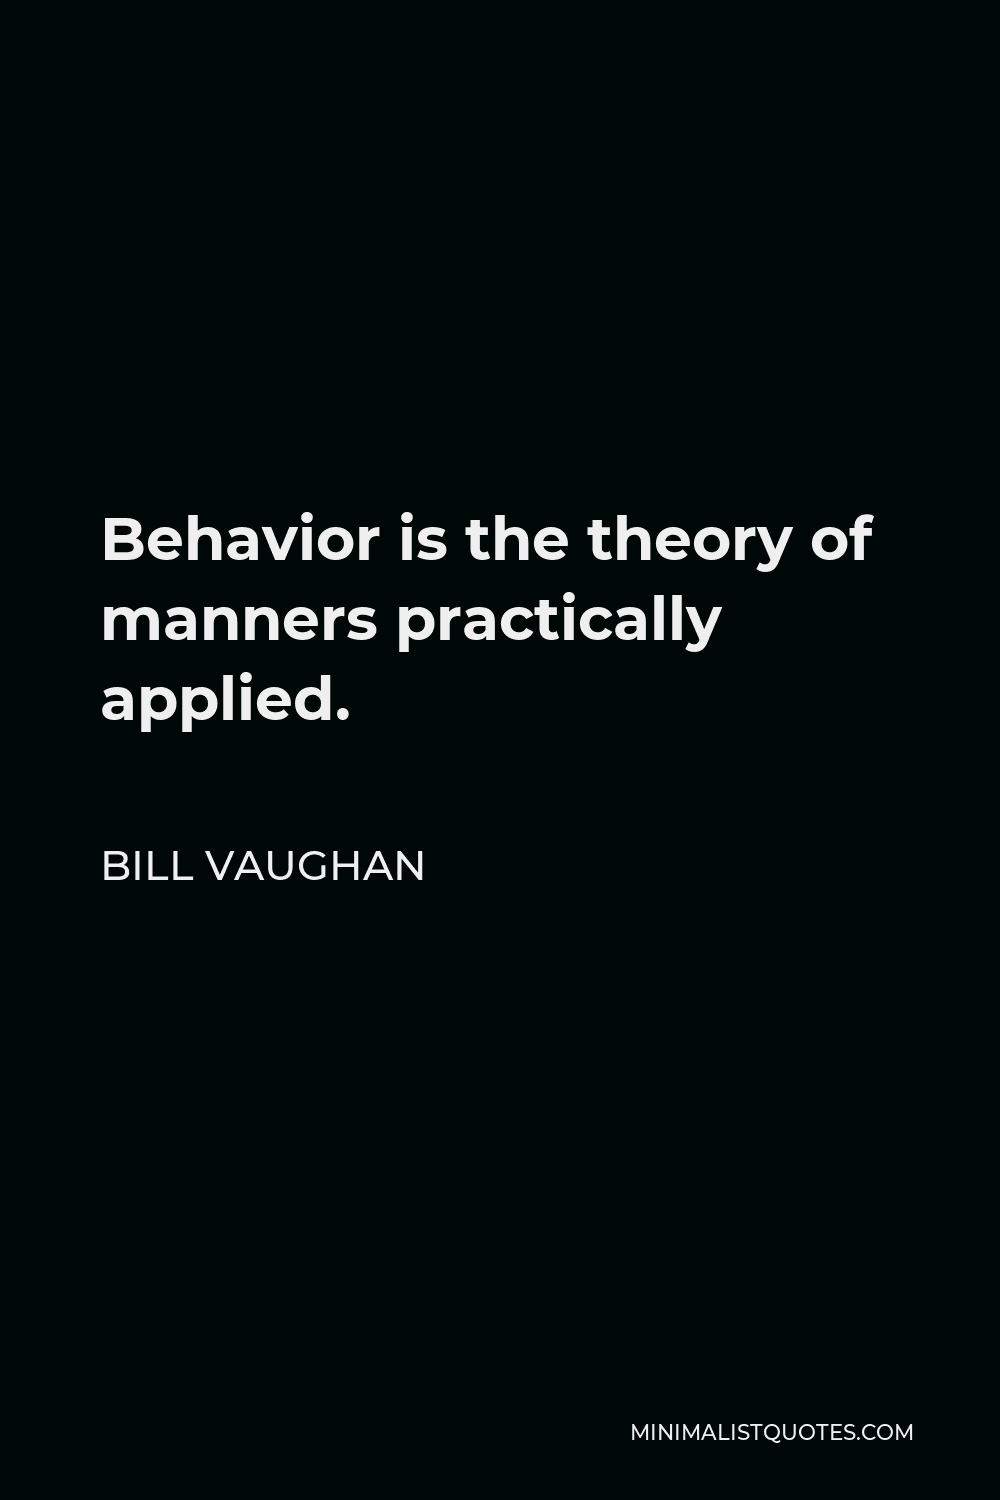 Bill Vaughan Quote - Behavior is the theory of manners practically applied.